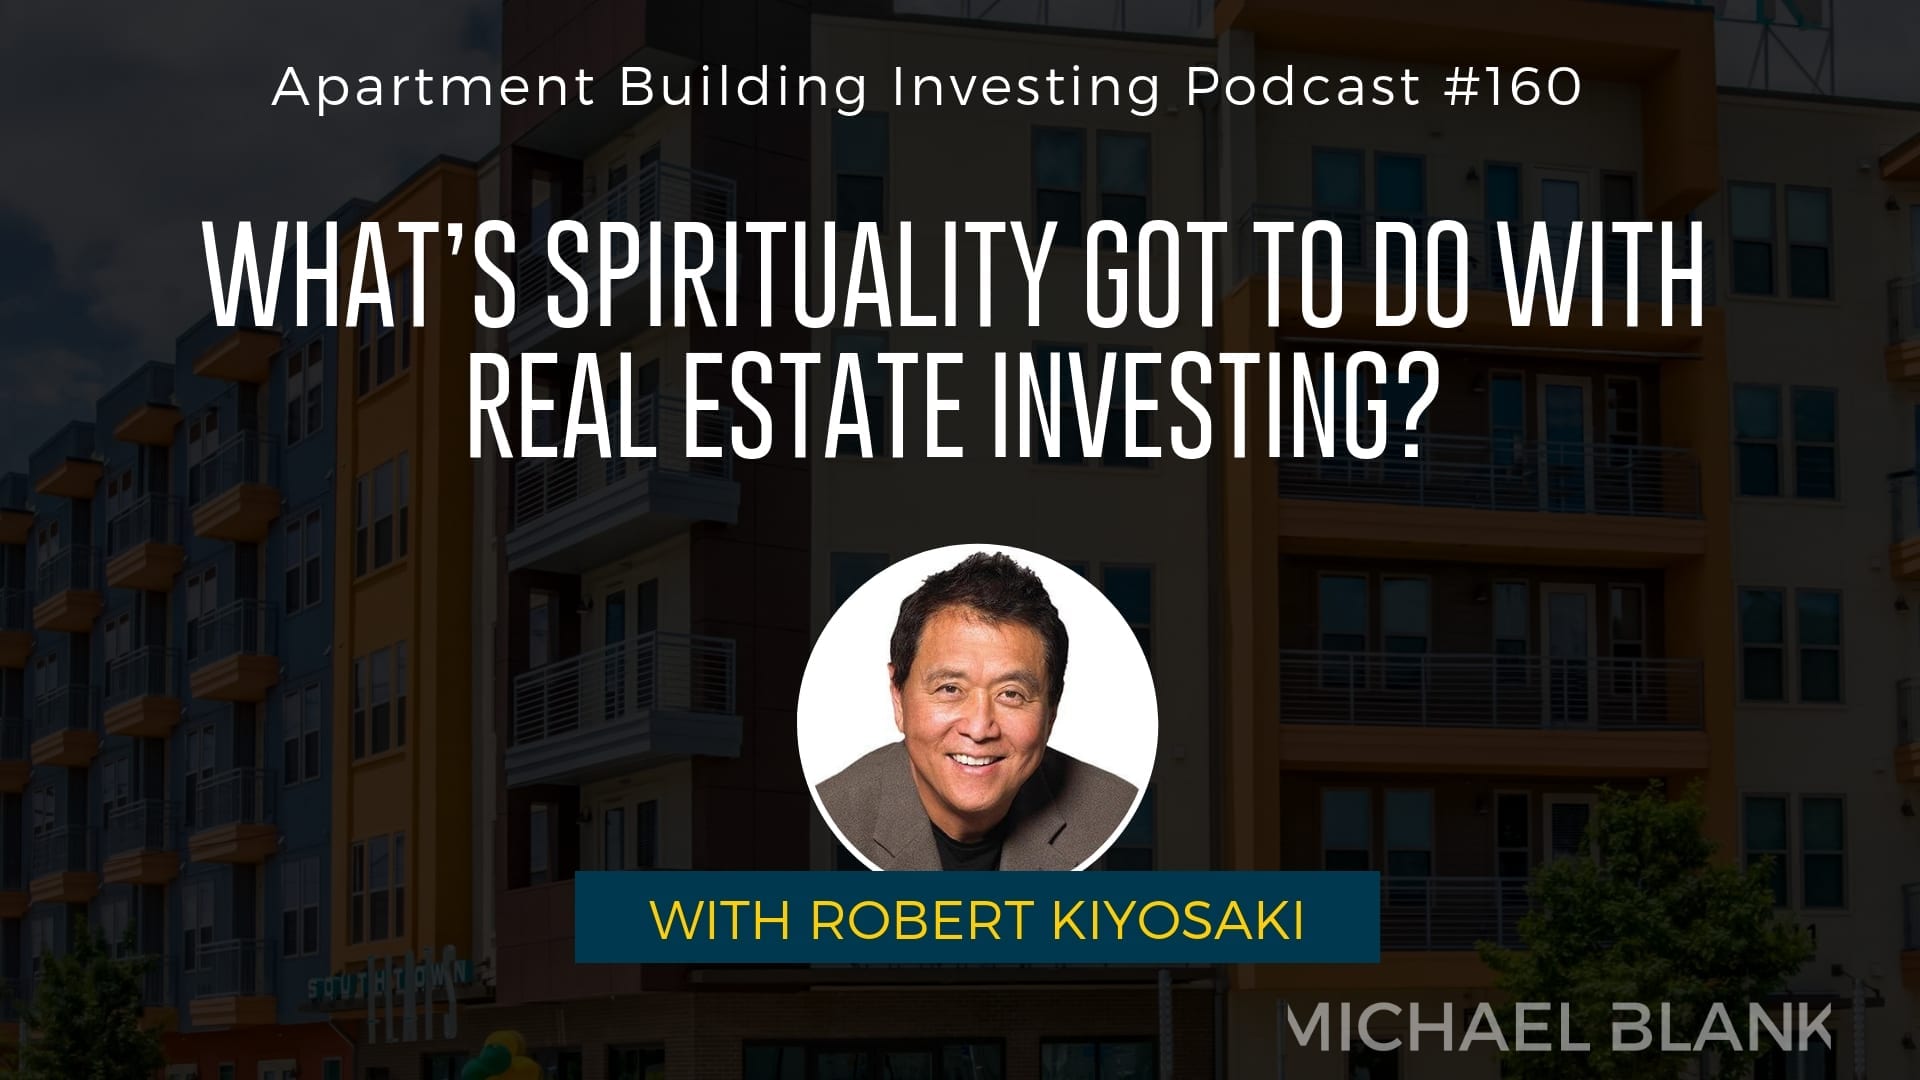 MB 160: What’s Spirituality Got to Do with Real Estate Investing? – With Robert Kiyosaki